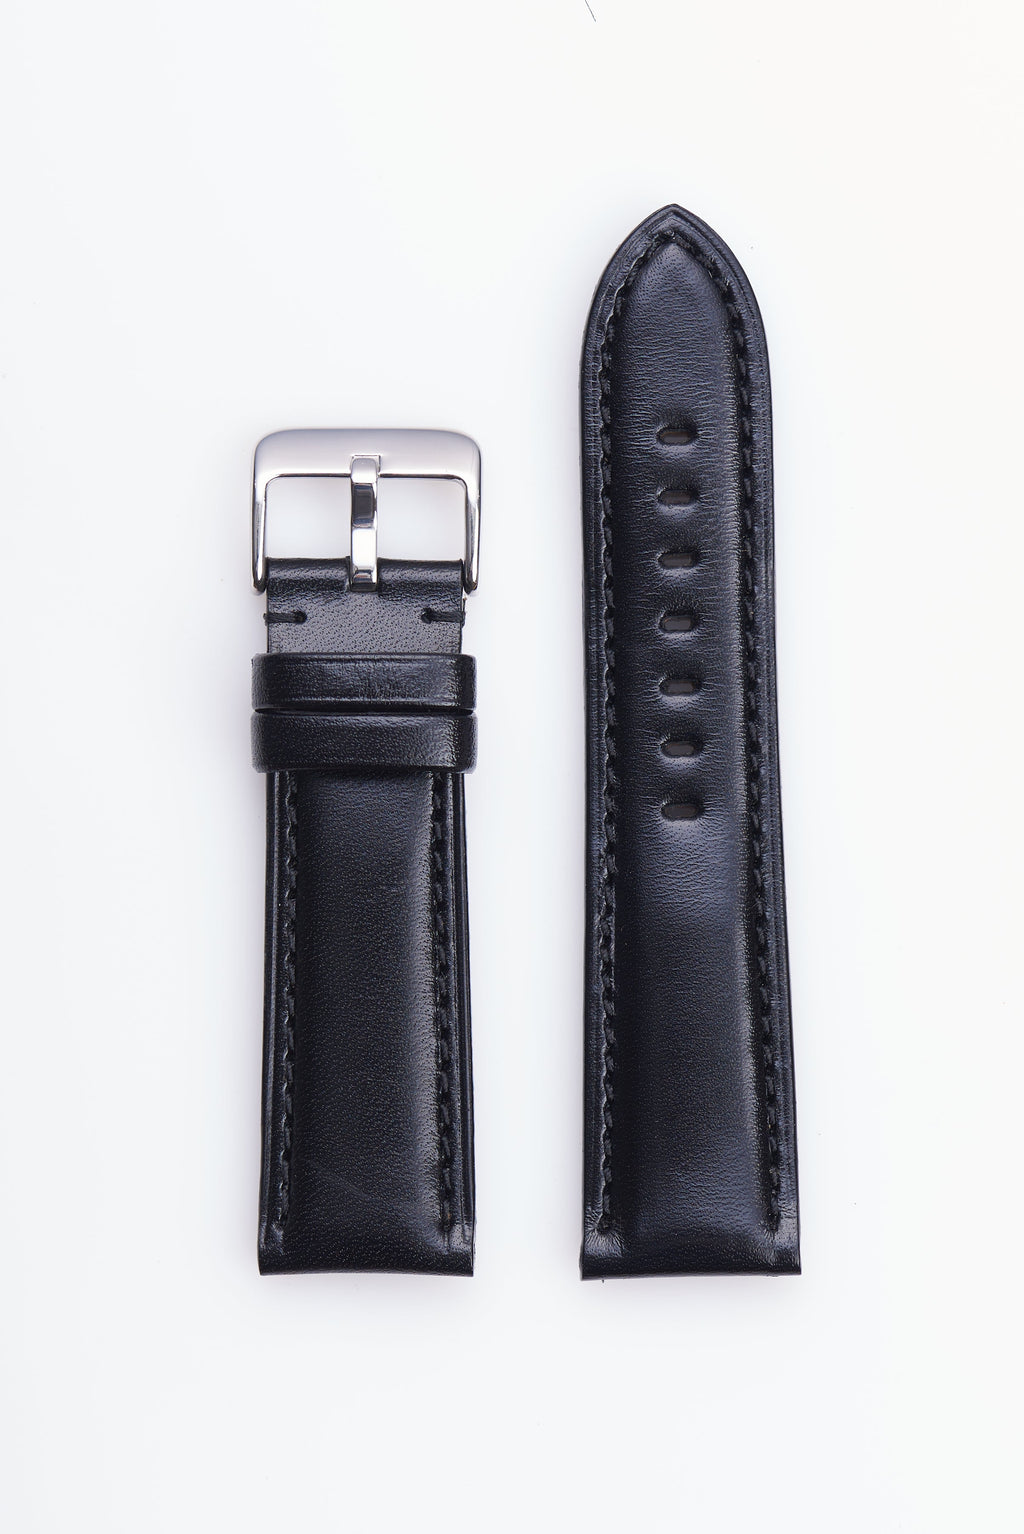 Black High Polished Italian Leather | USA Made - Apple Watch Compatible - H2046